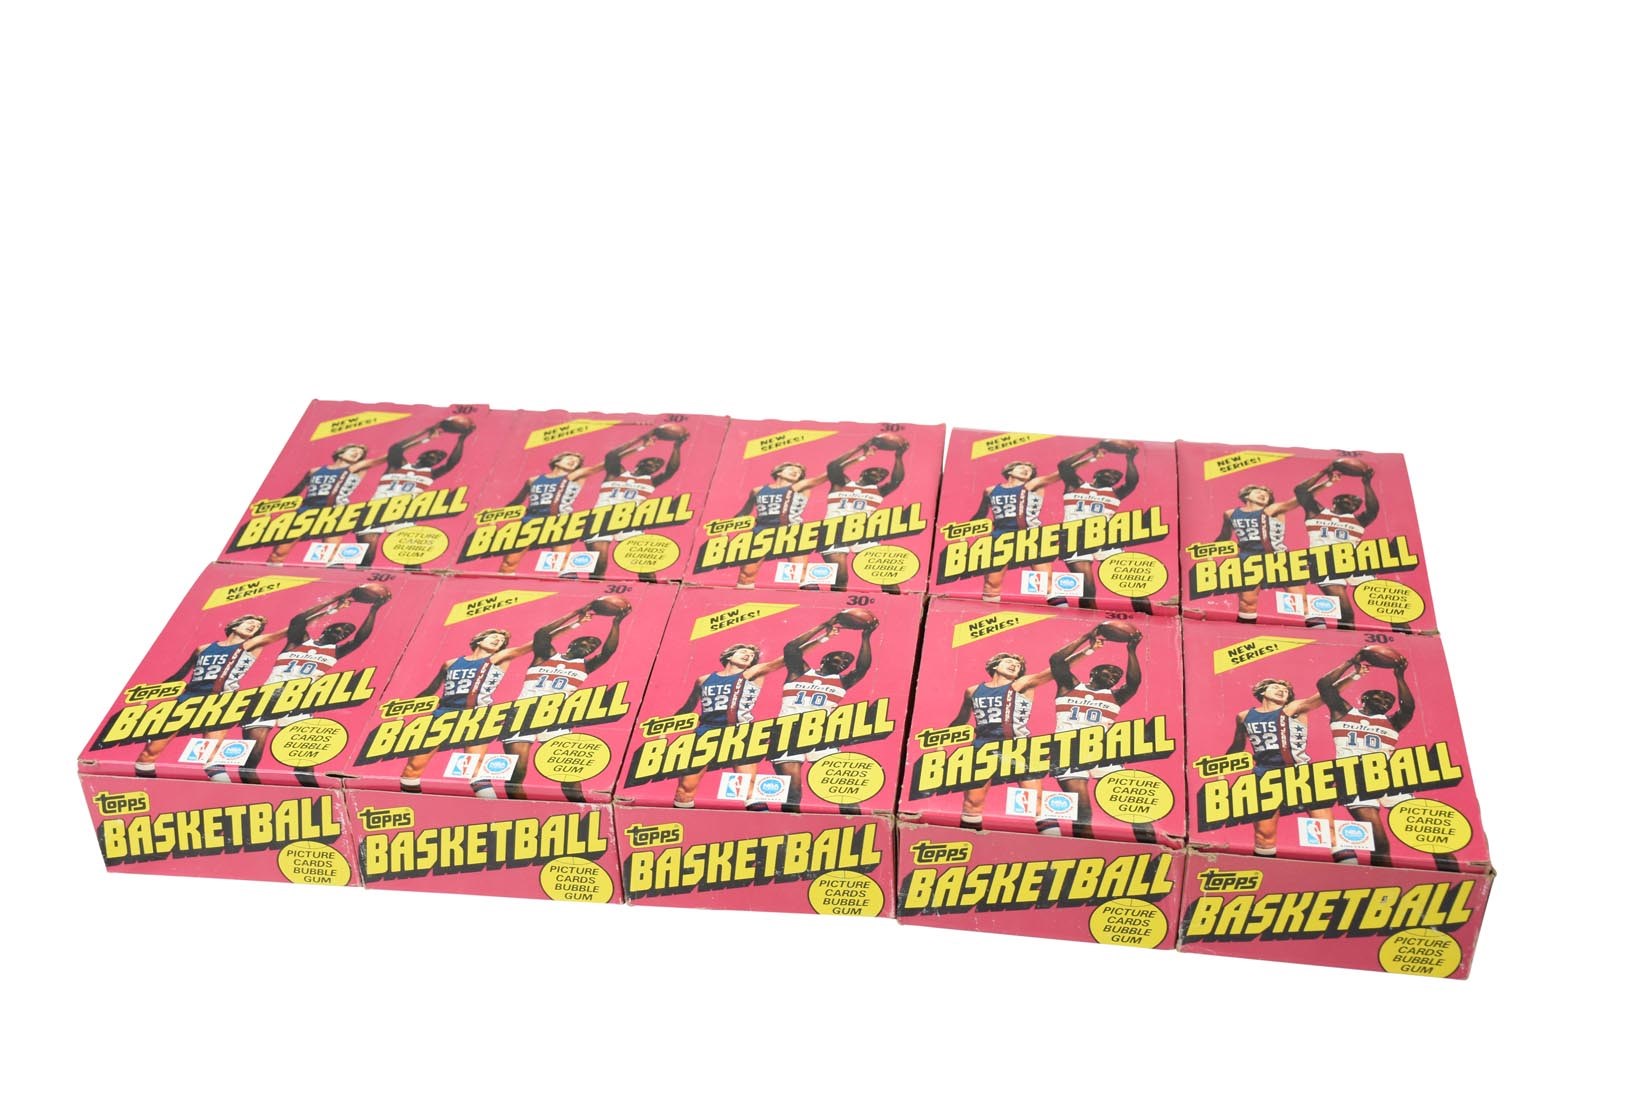 Unopened Wax Packs Boxes and Cases - 1981 Topps Basketball Wax Box Lot of 10 Boxes with Original Wax Carton!